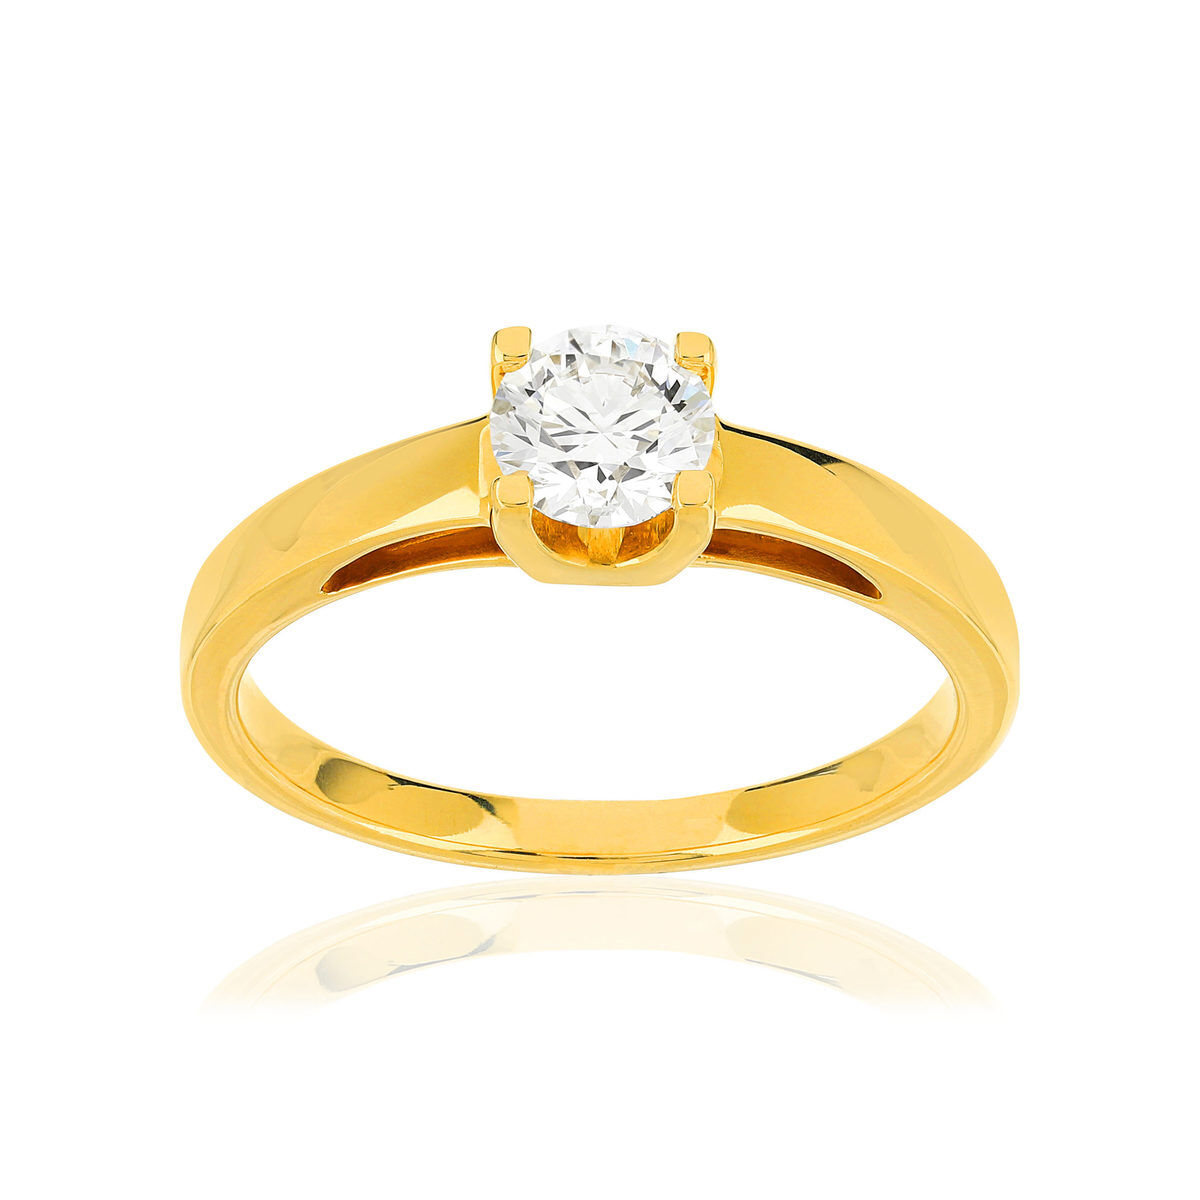 MATY Solitaire or jaune 750 diamant synthÃ©tique 0,5 carat- MATY